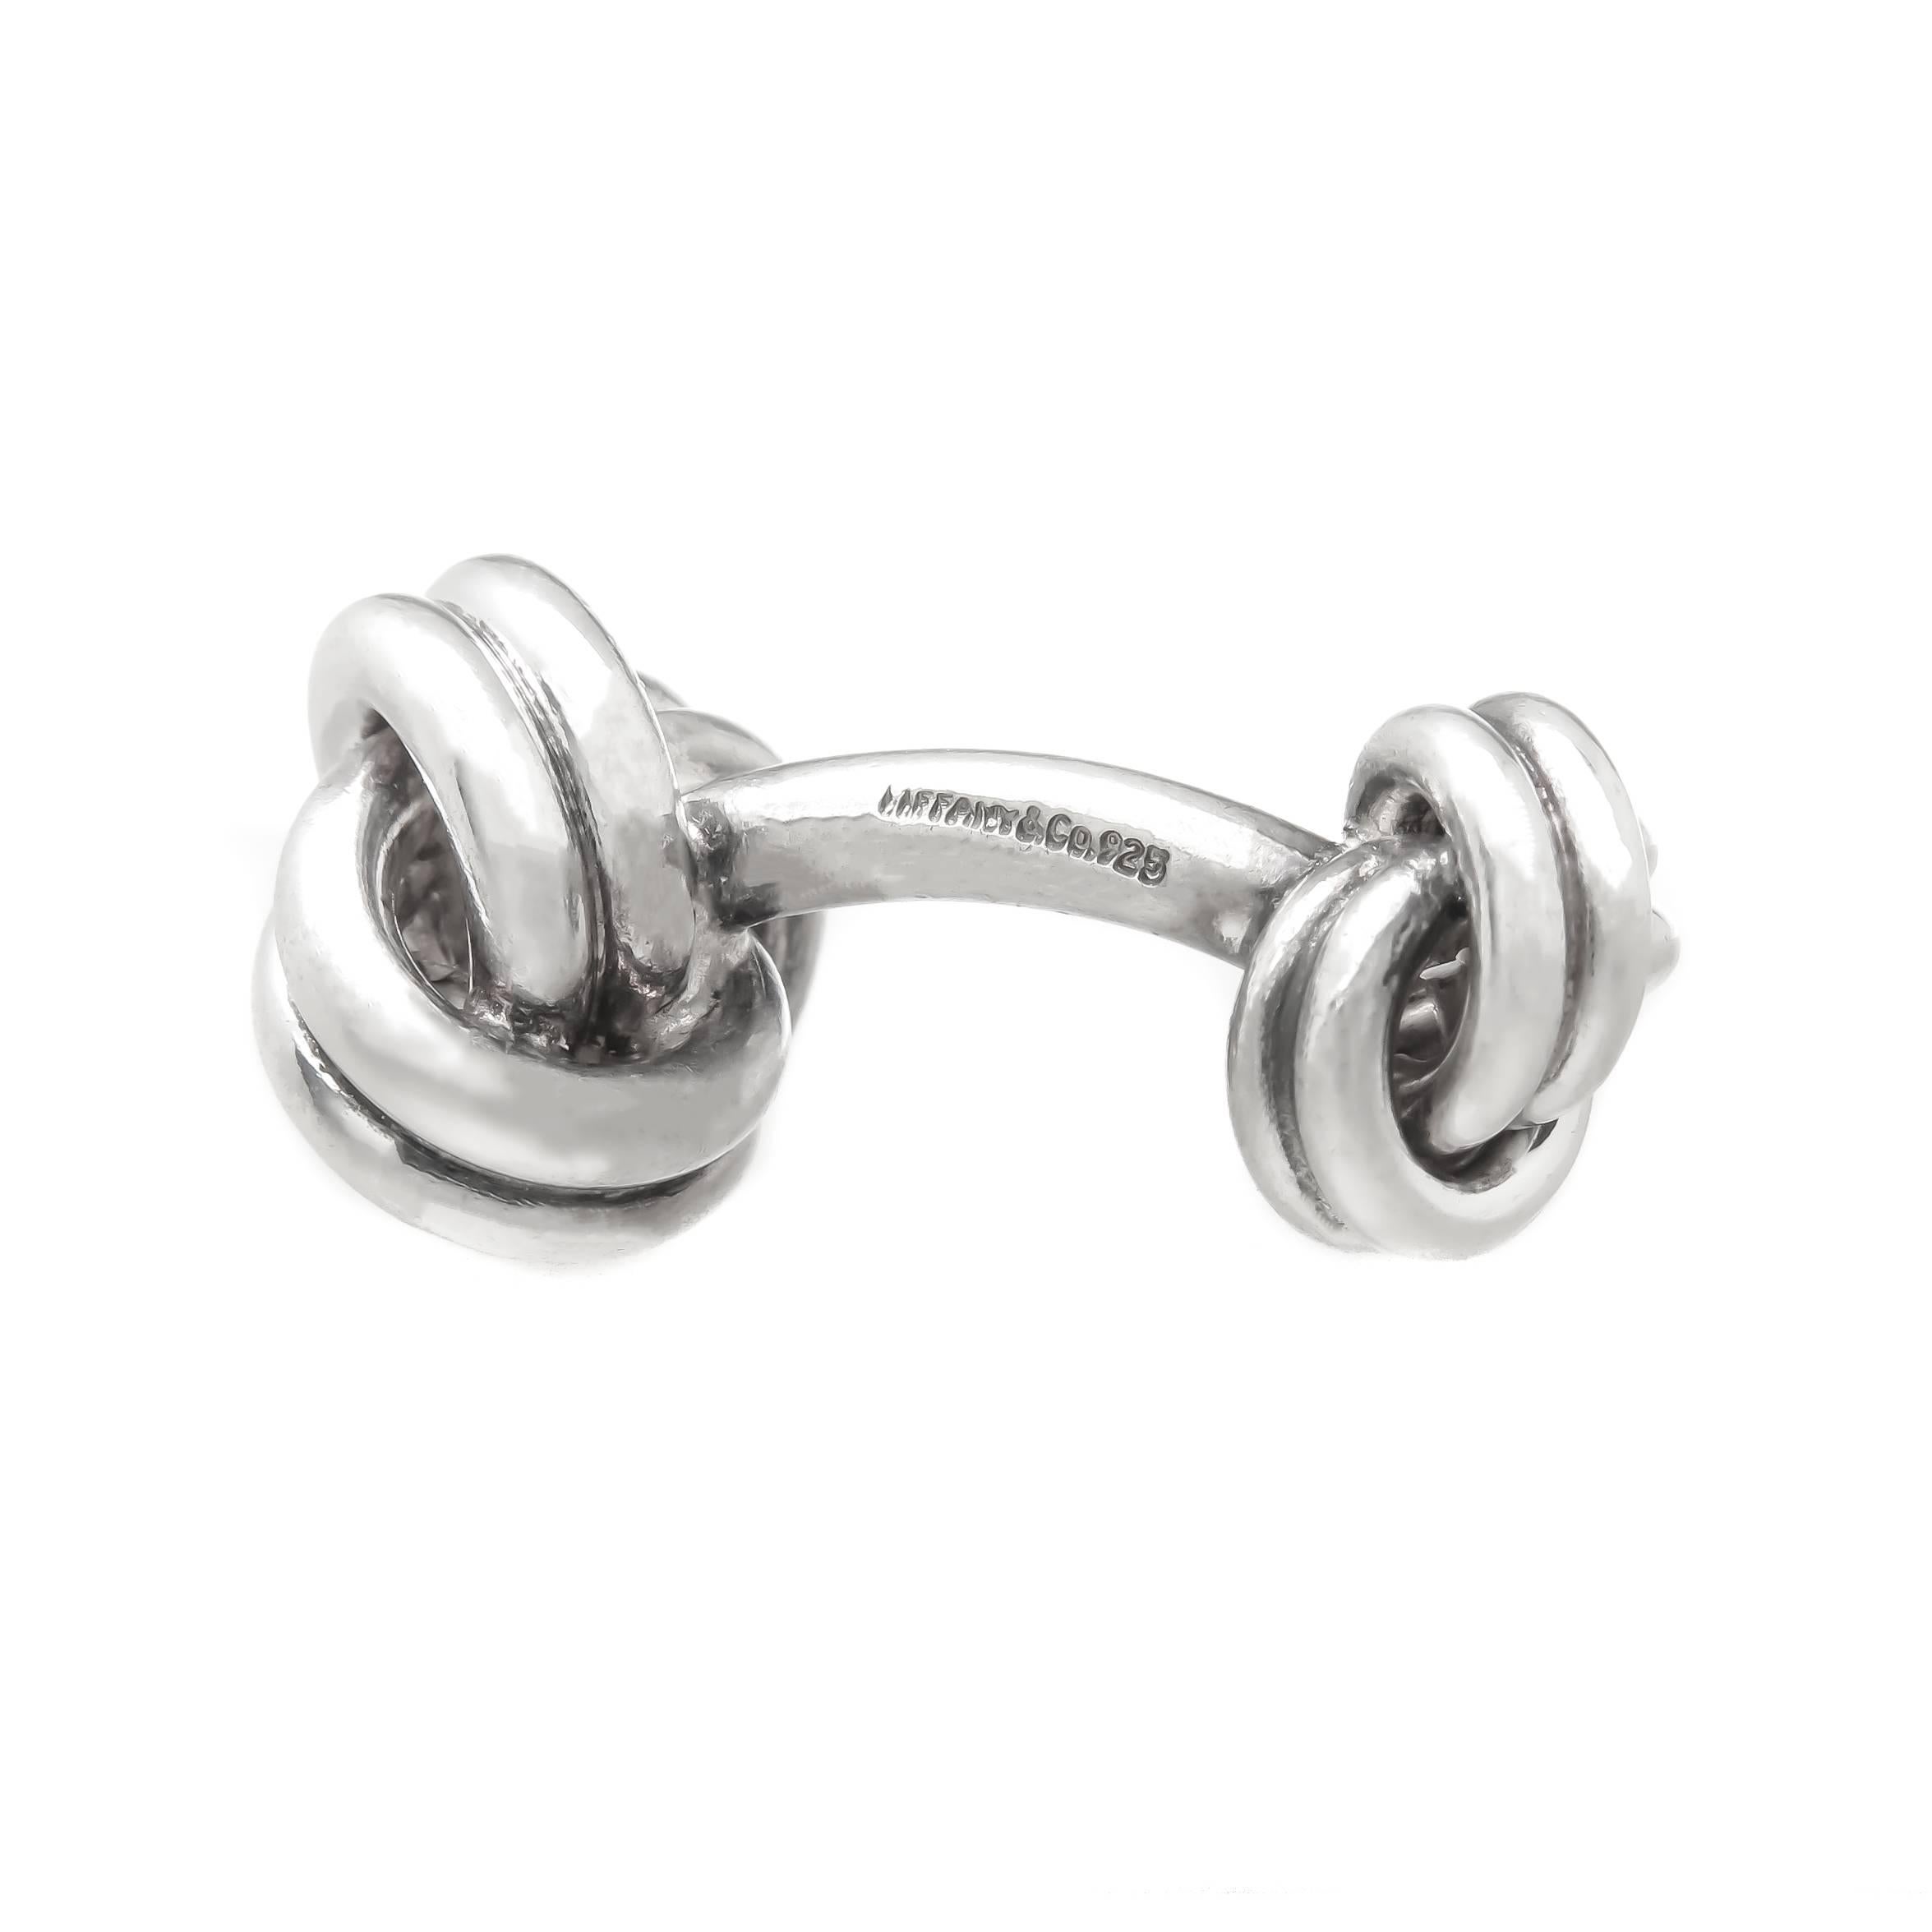 Circa 2010 Tiffany & Co. Sterling Silver Double Knot Cufflinks, Measuring 1 1/8 inch in length with the larger Knot end measuring 1/2 inch. Comes in a Tiffany felt Pouch.